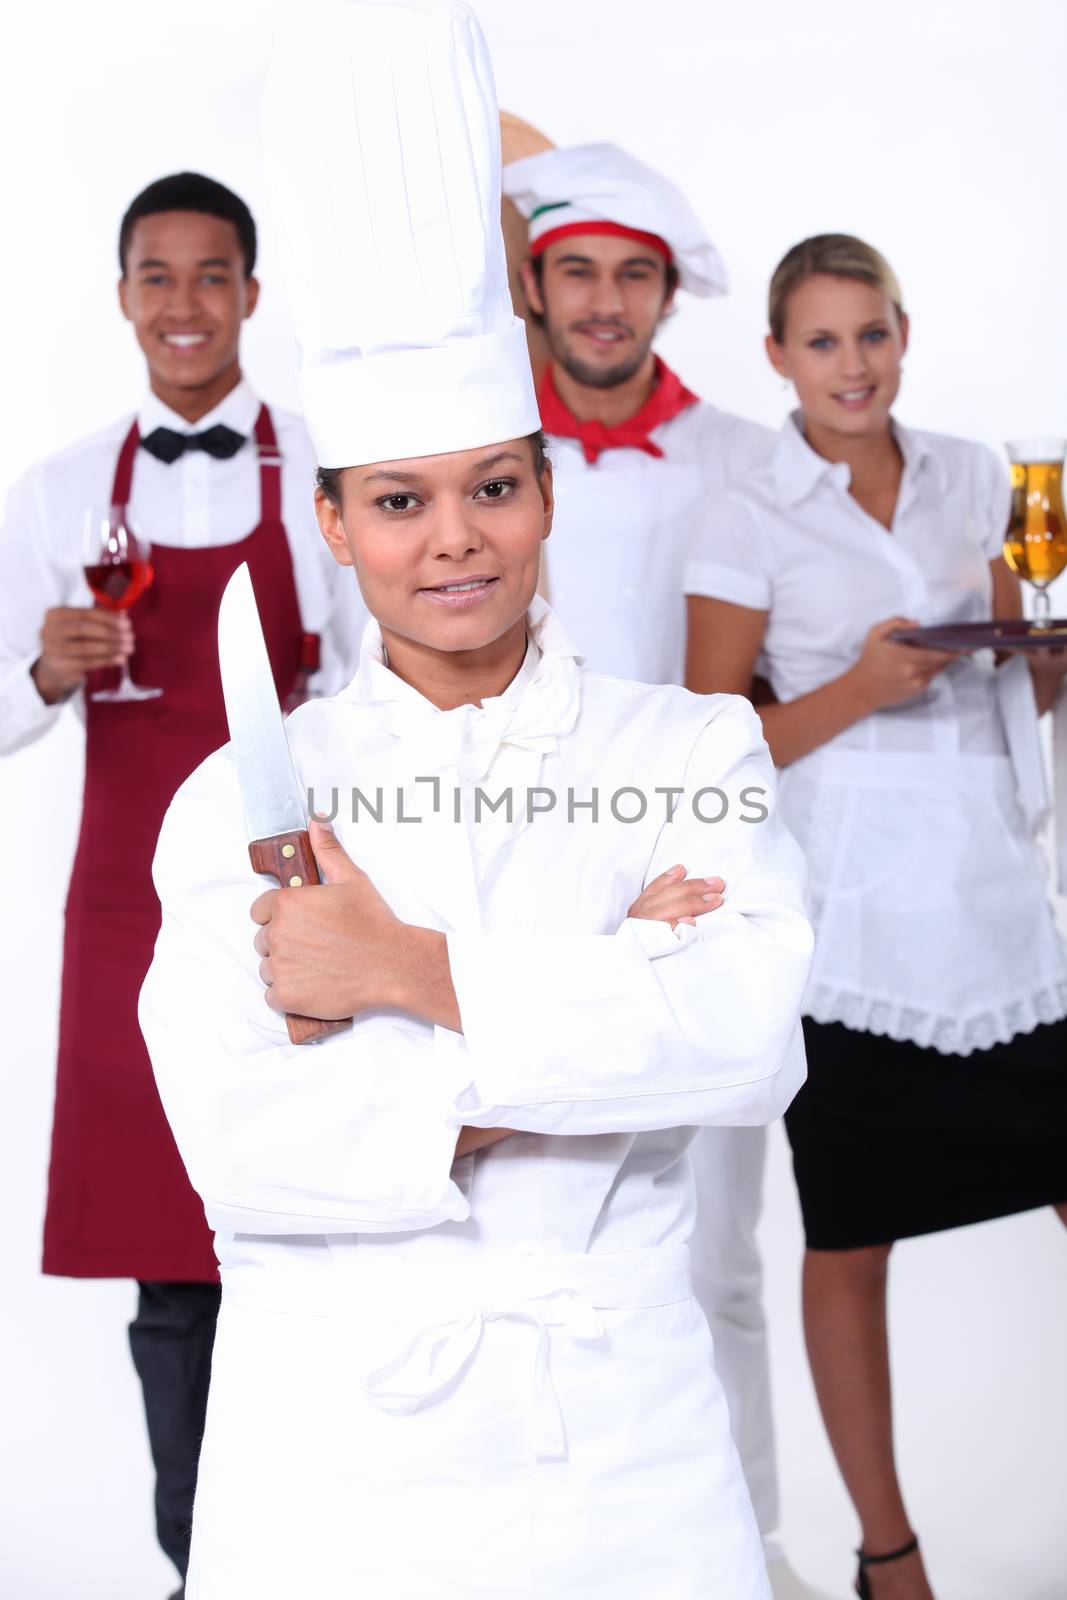 Catering professionals by phovoir